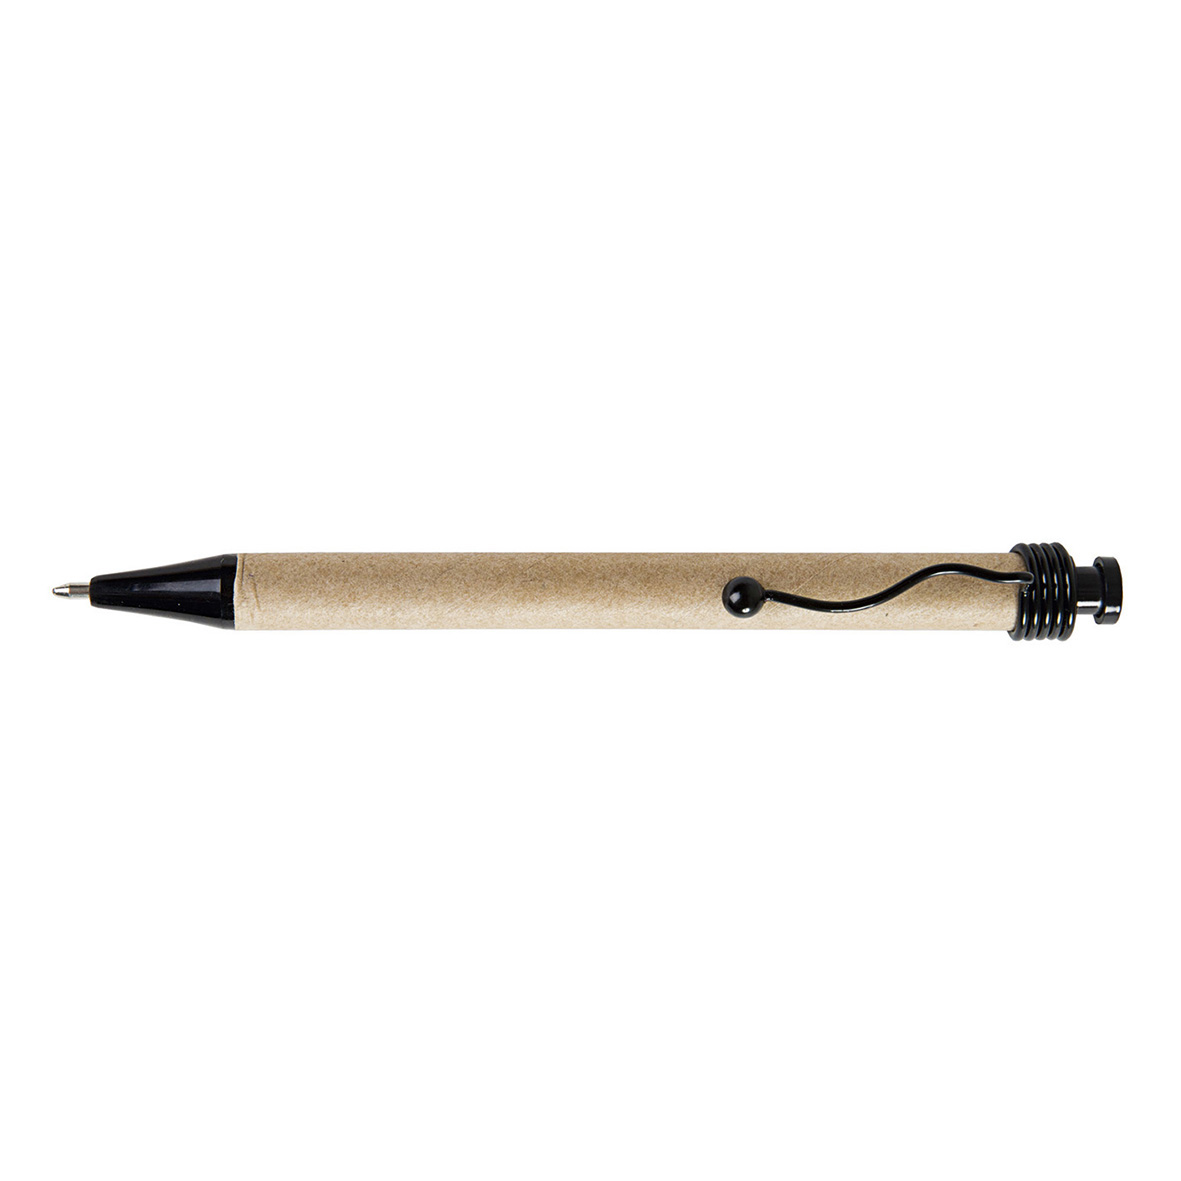 Stylo bille publicitaire recycle/clip metal cote1201 - stylo recycle - stylos ecologiques